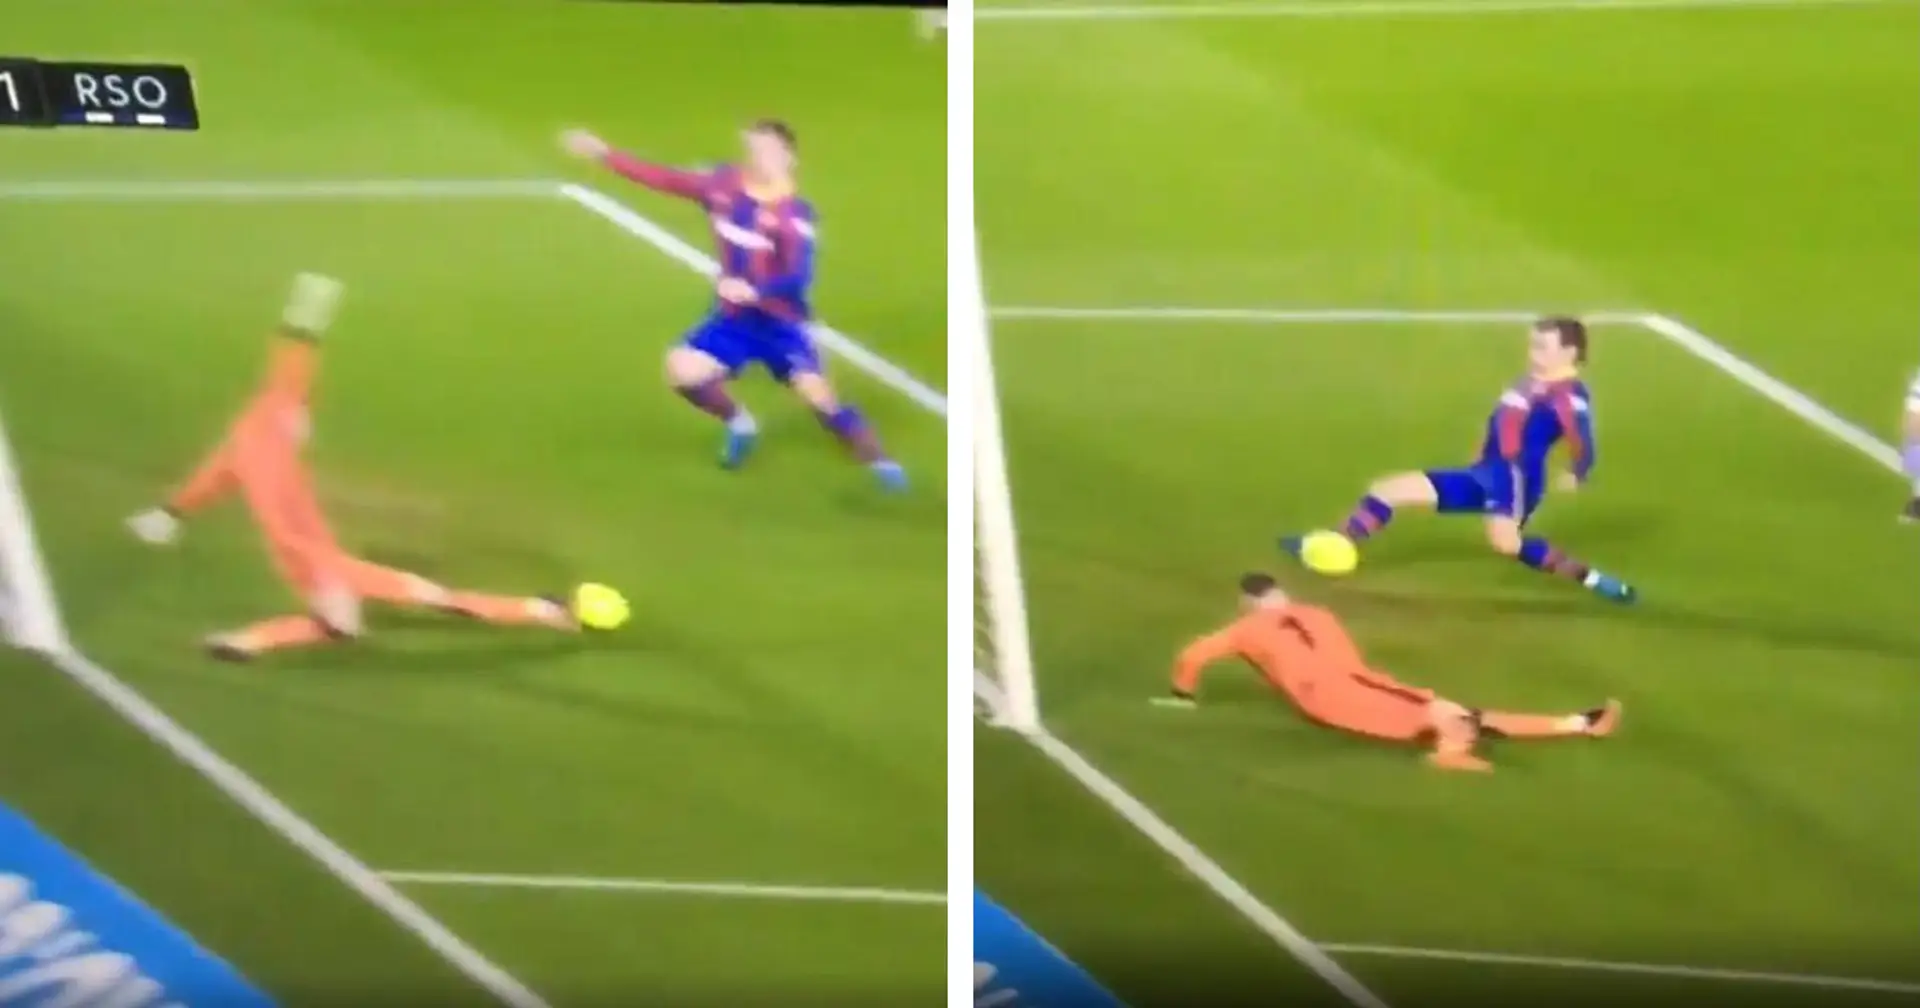 Explained: Why Griezmann's miss wasn't as terrible as it seemed at first glance